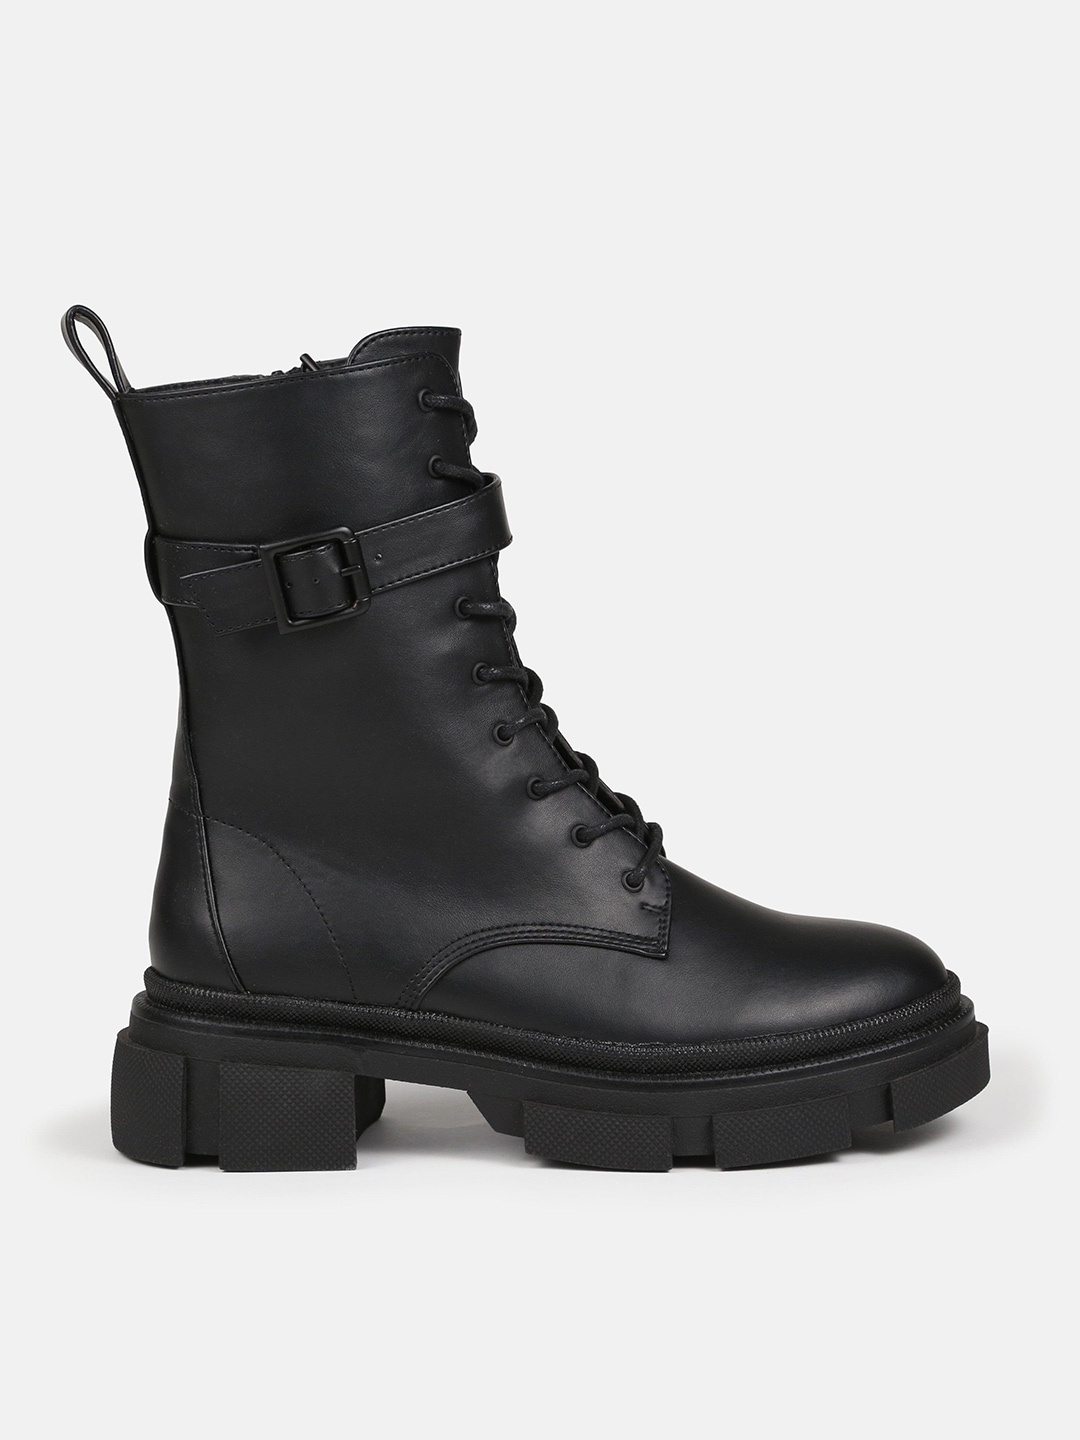 Missguided Black PU Block Heeled Boots Price in India